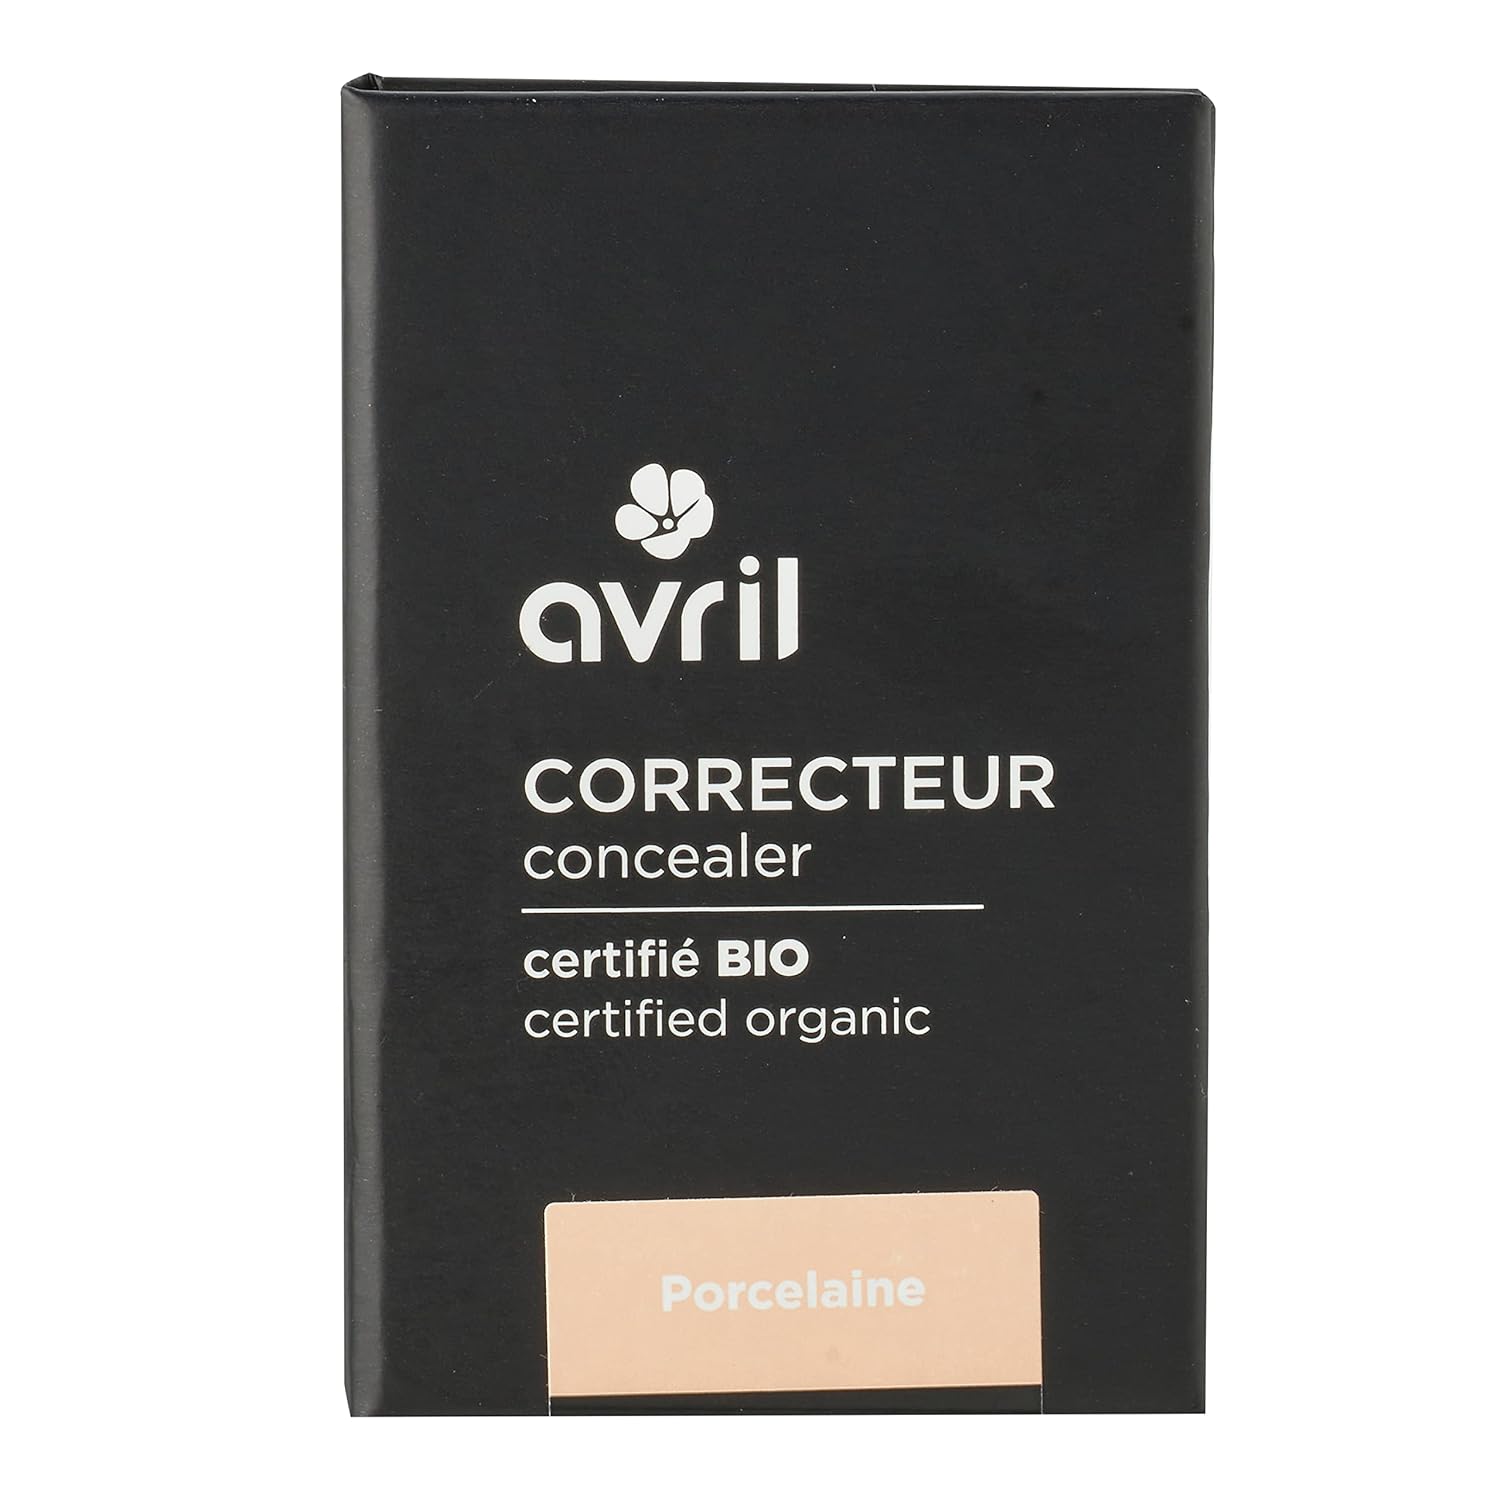 Avril - Organic Concealer - Creamy Texture - Apply Fingers or Brushes - 100% Natural Origin - Organic Ecocert Certified - Made in Italy - 4g